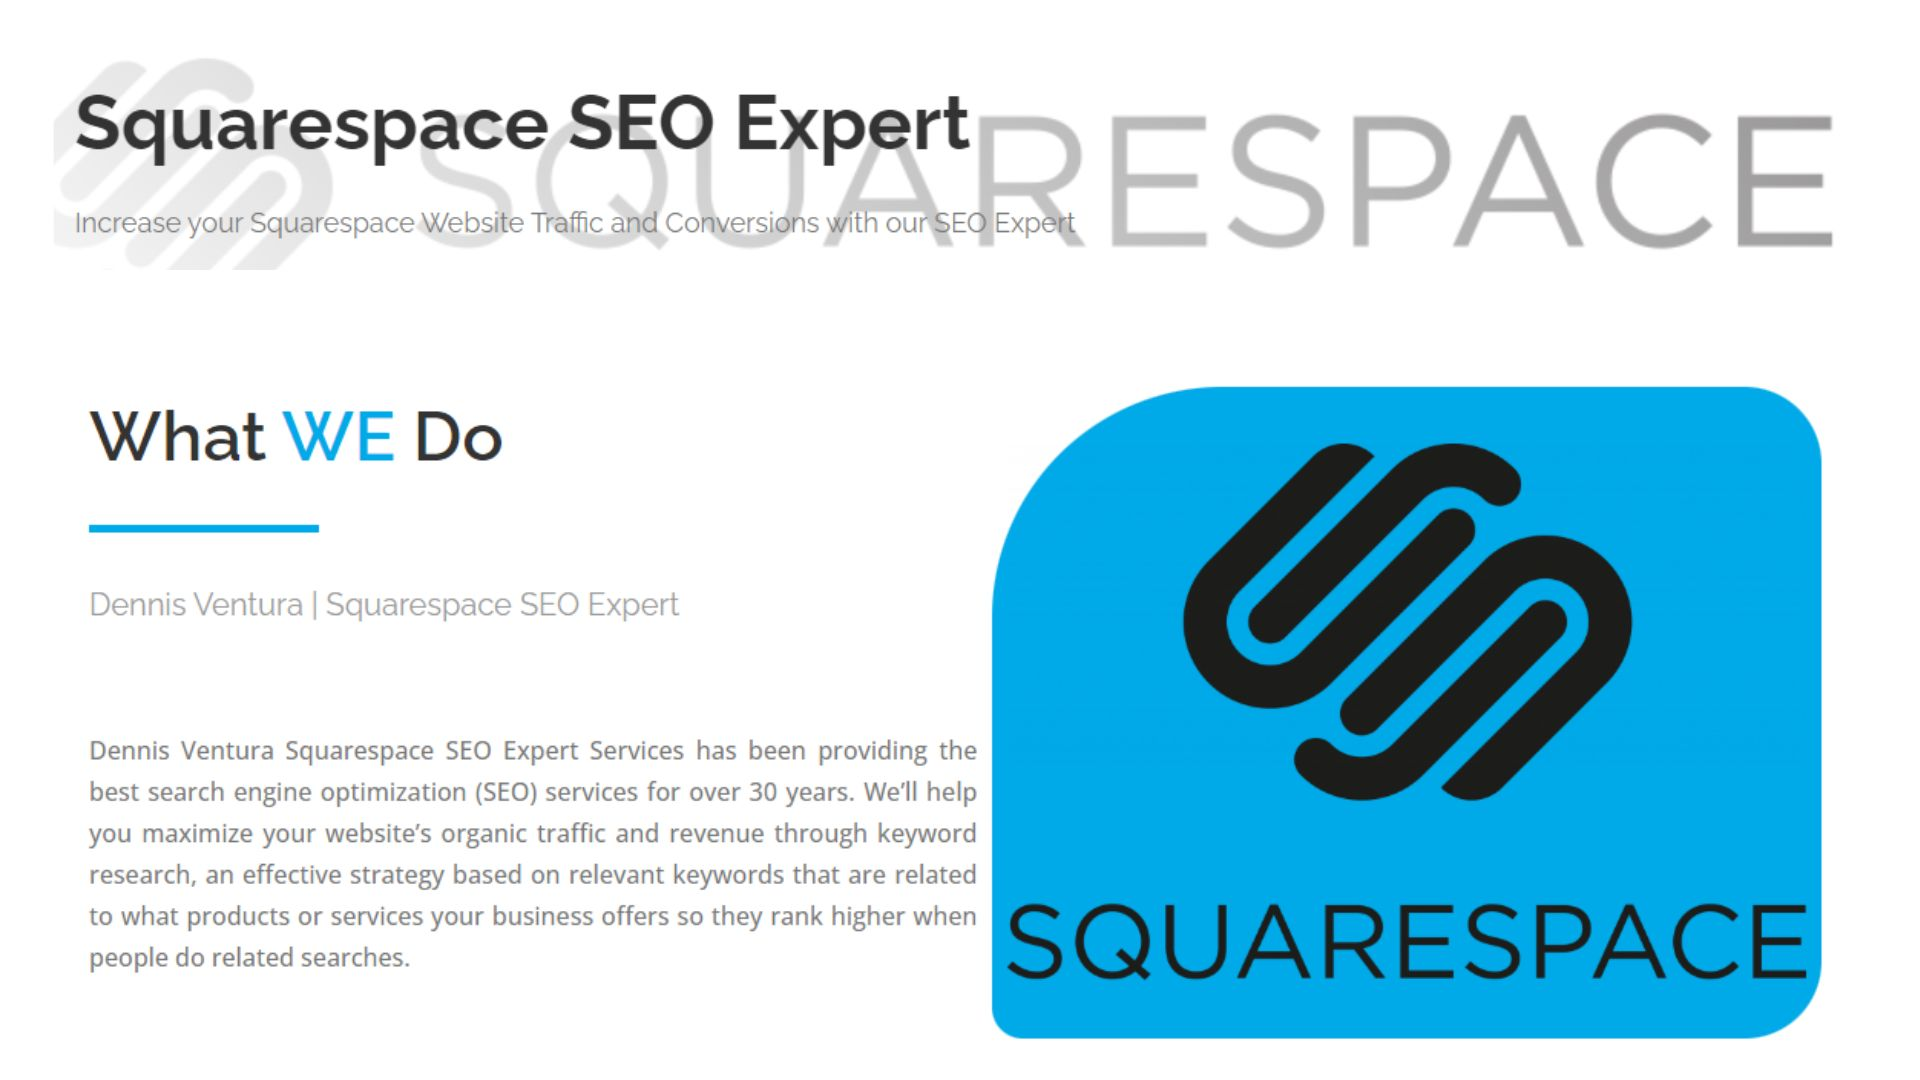 What Are Some Common Mistakes People Make With Their Squarespace Websites When it Comes to SEO?